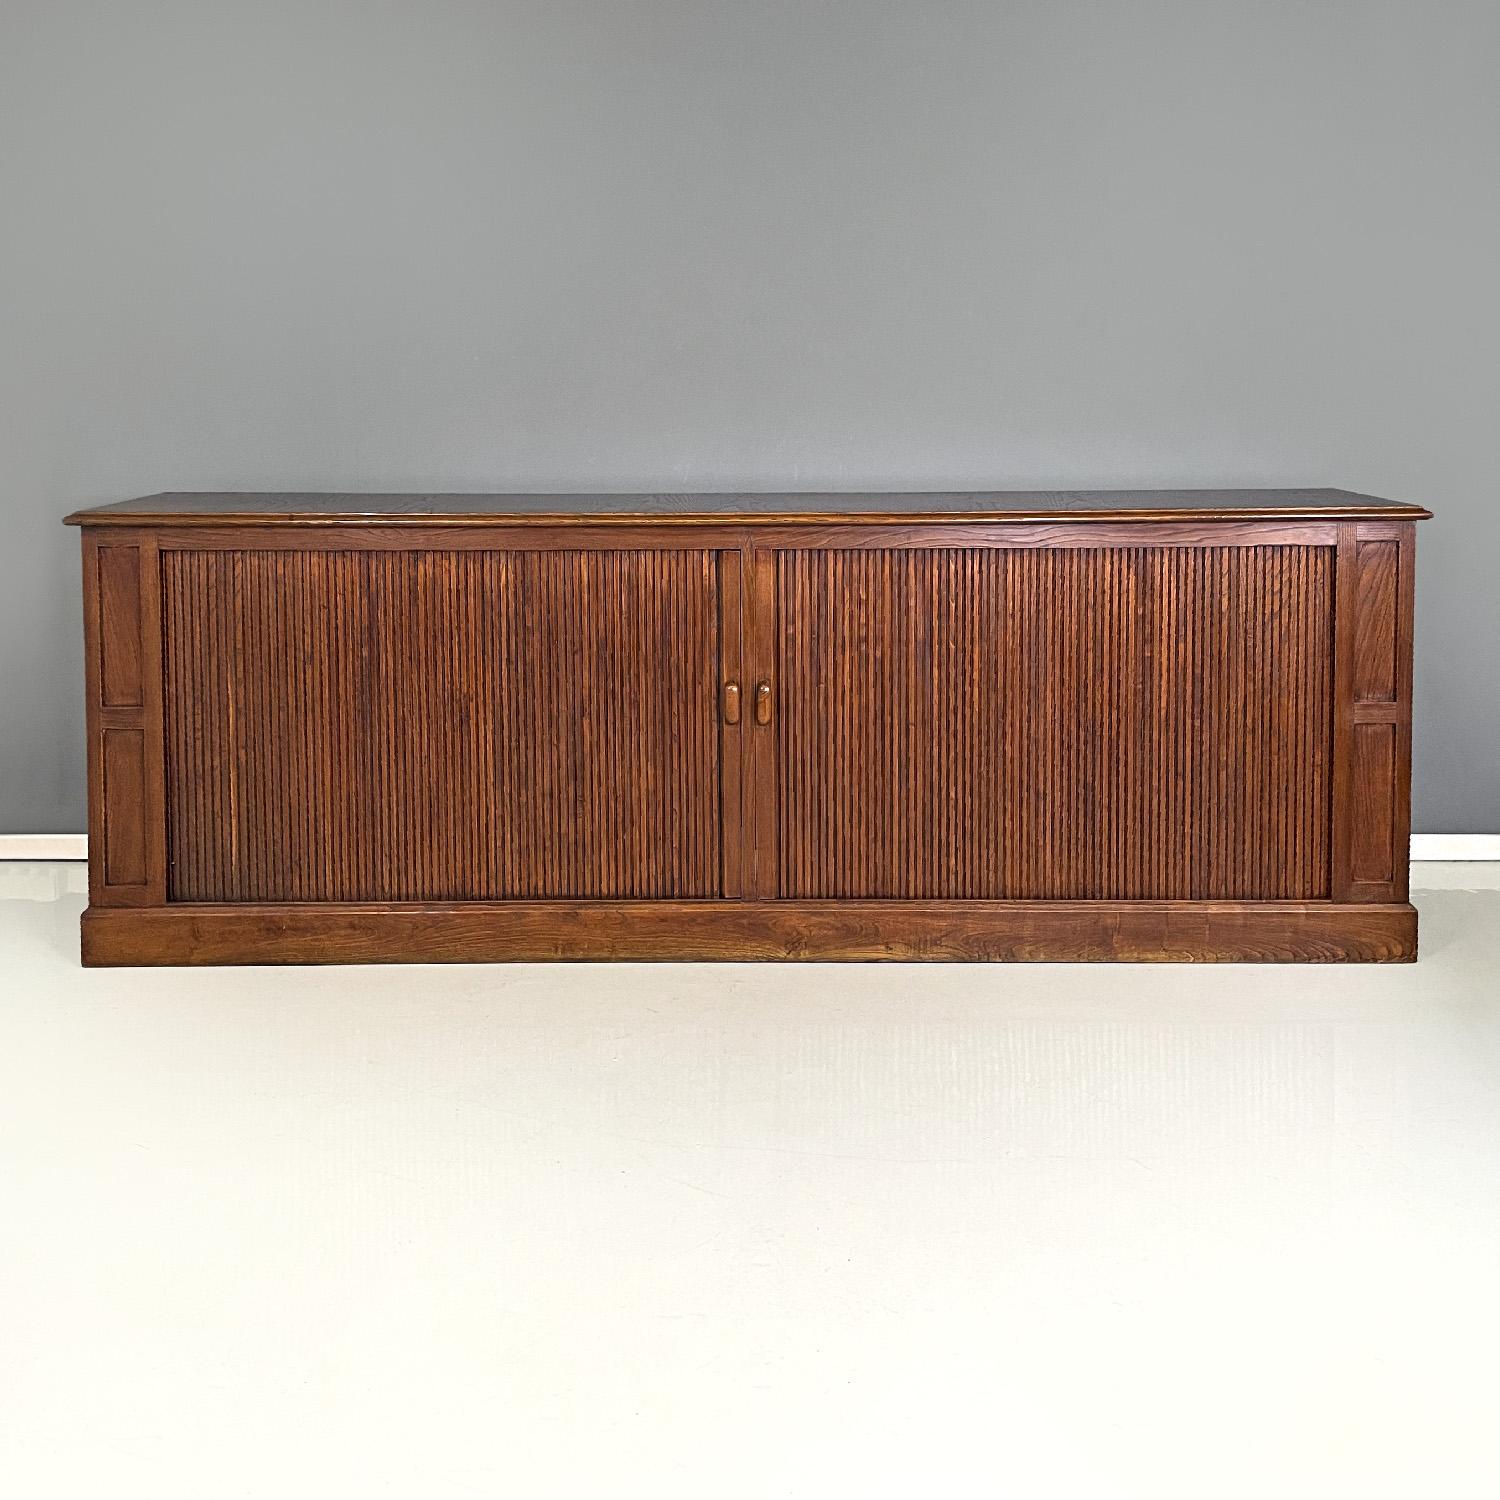 Italian Art Deco wooden sideboard with shutter opening, 1920s
Sideboard with rectangular base made entirely of wood. The top is composed of a smooth rectangular wooden board with shaped edges and slightly wider than the central structure. It has a